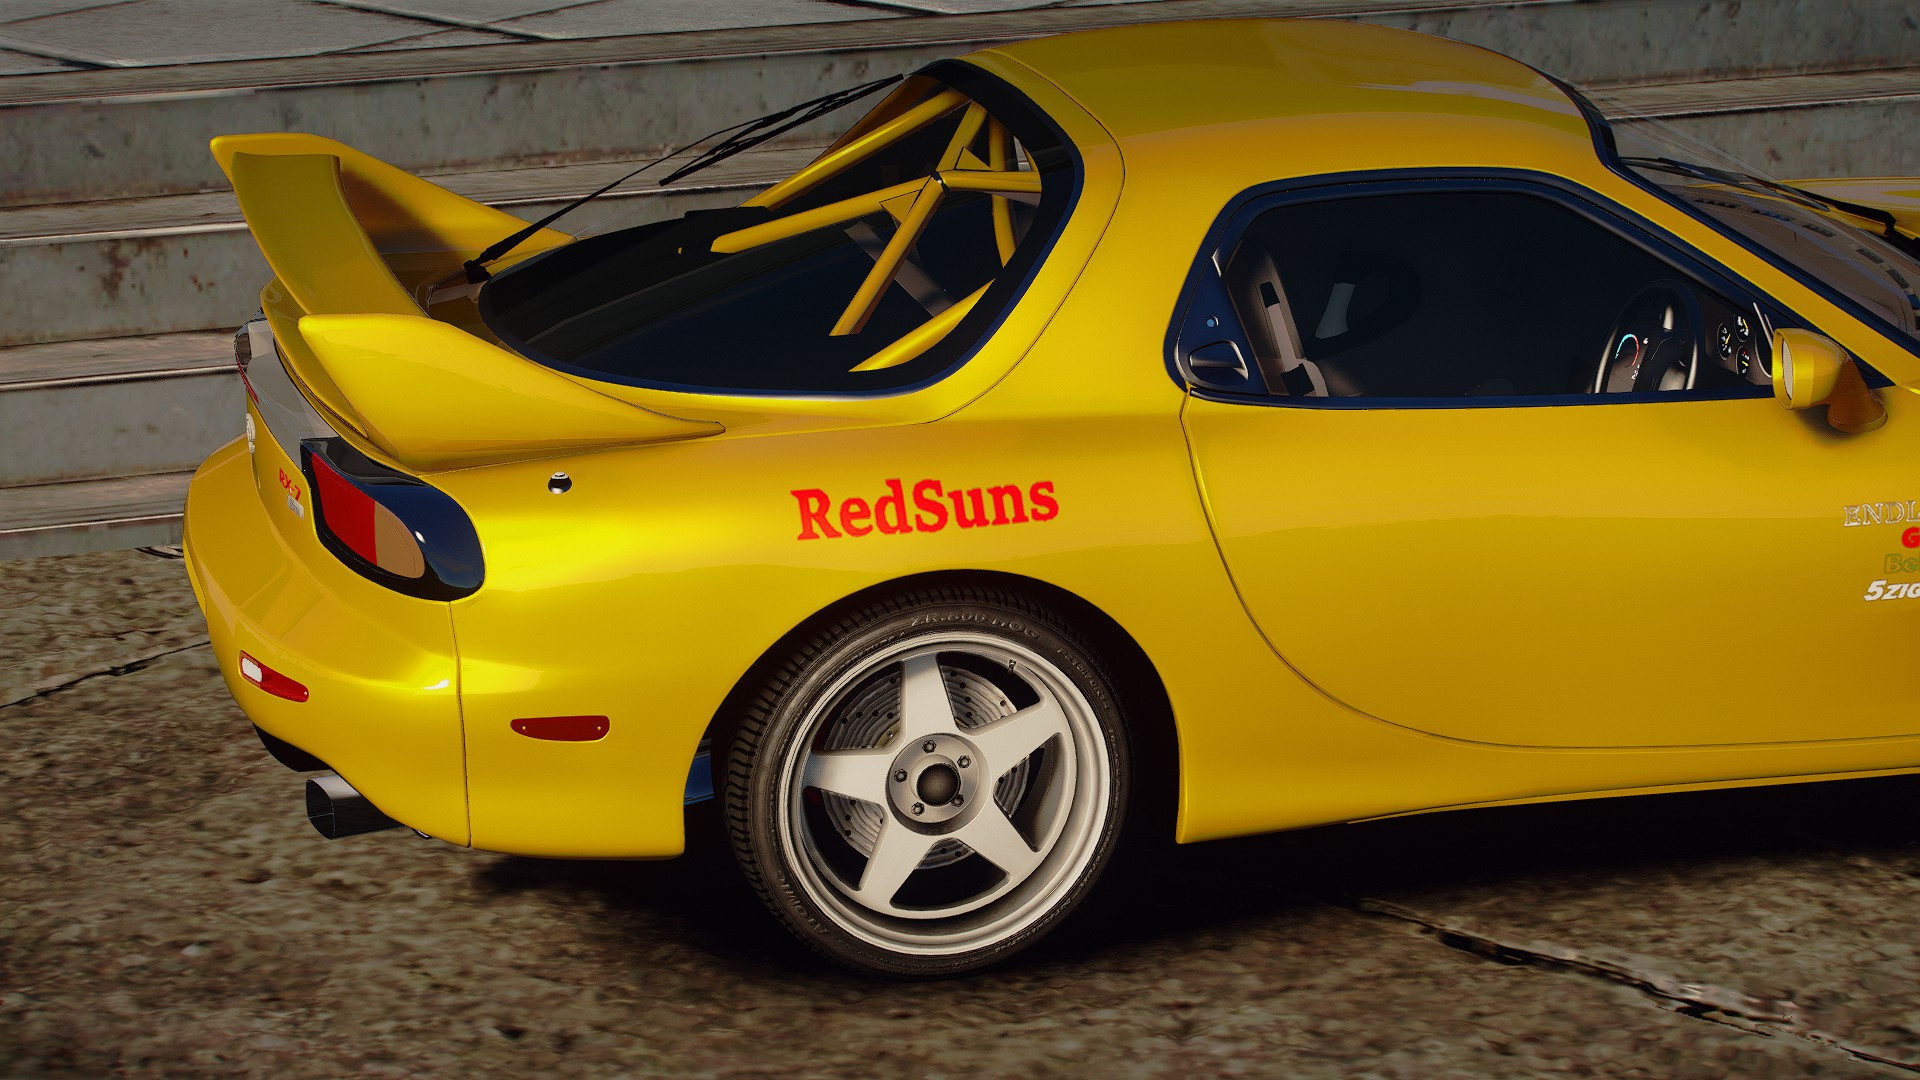 Initial D Arcade Stage 5 - First Stage Keisuke's FD (Mod) 